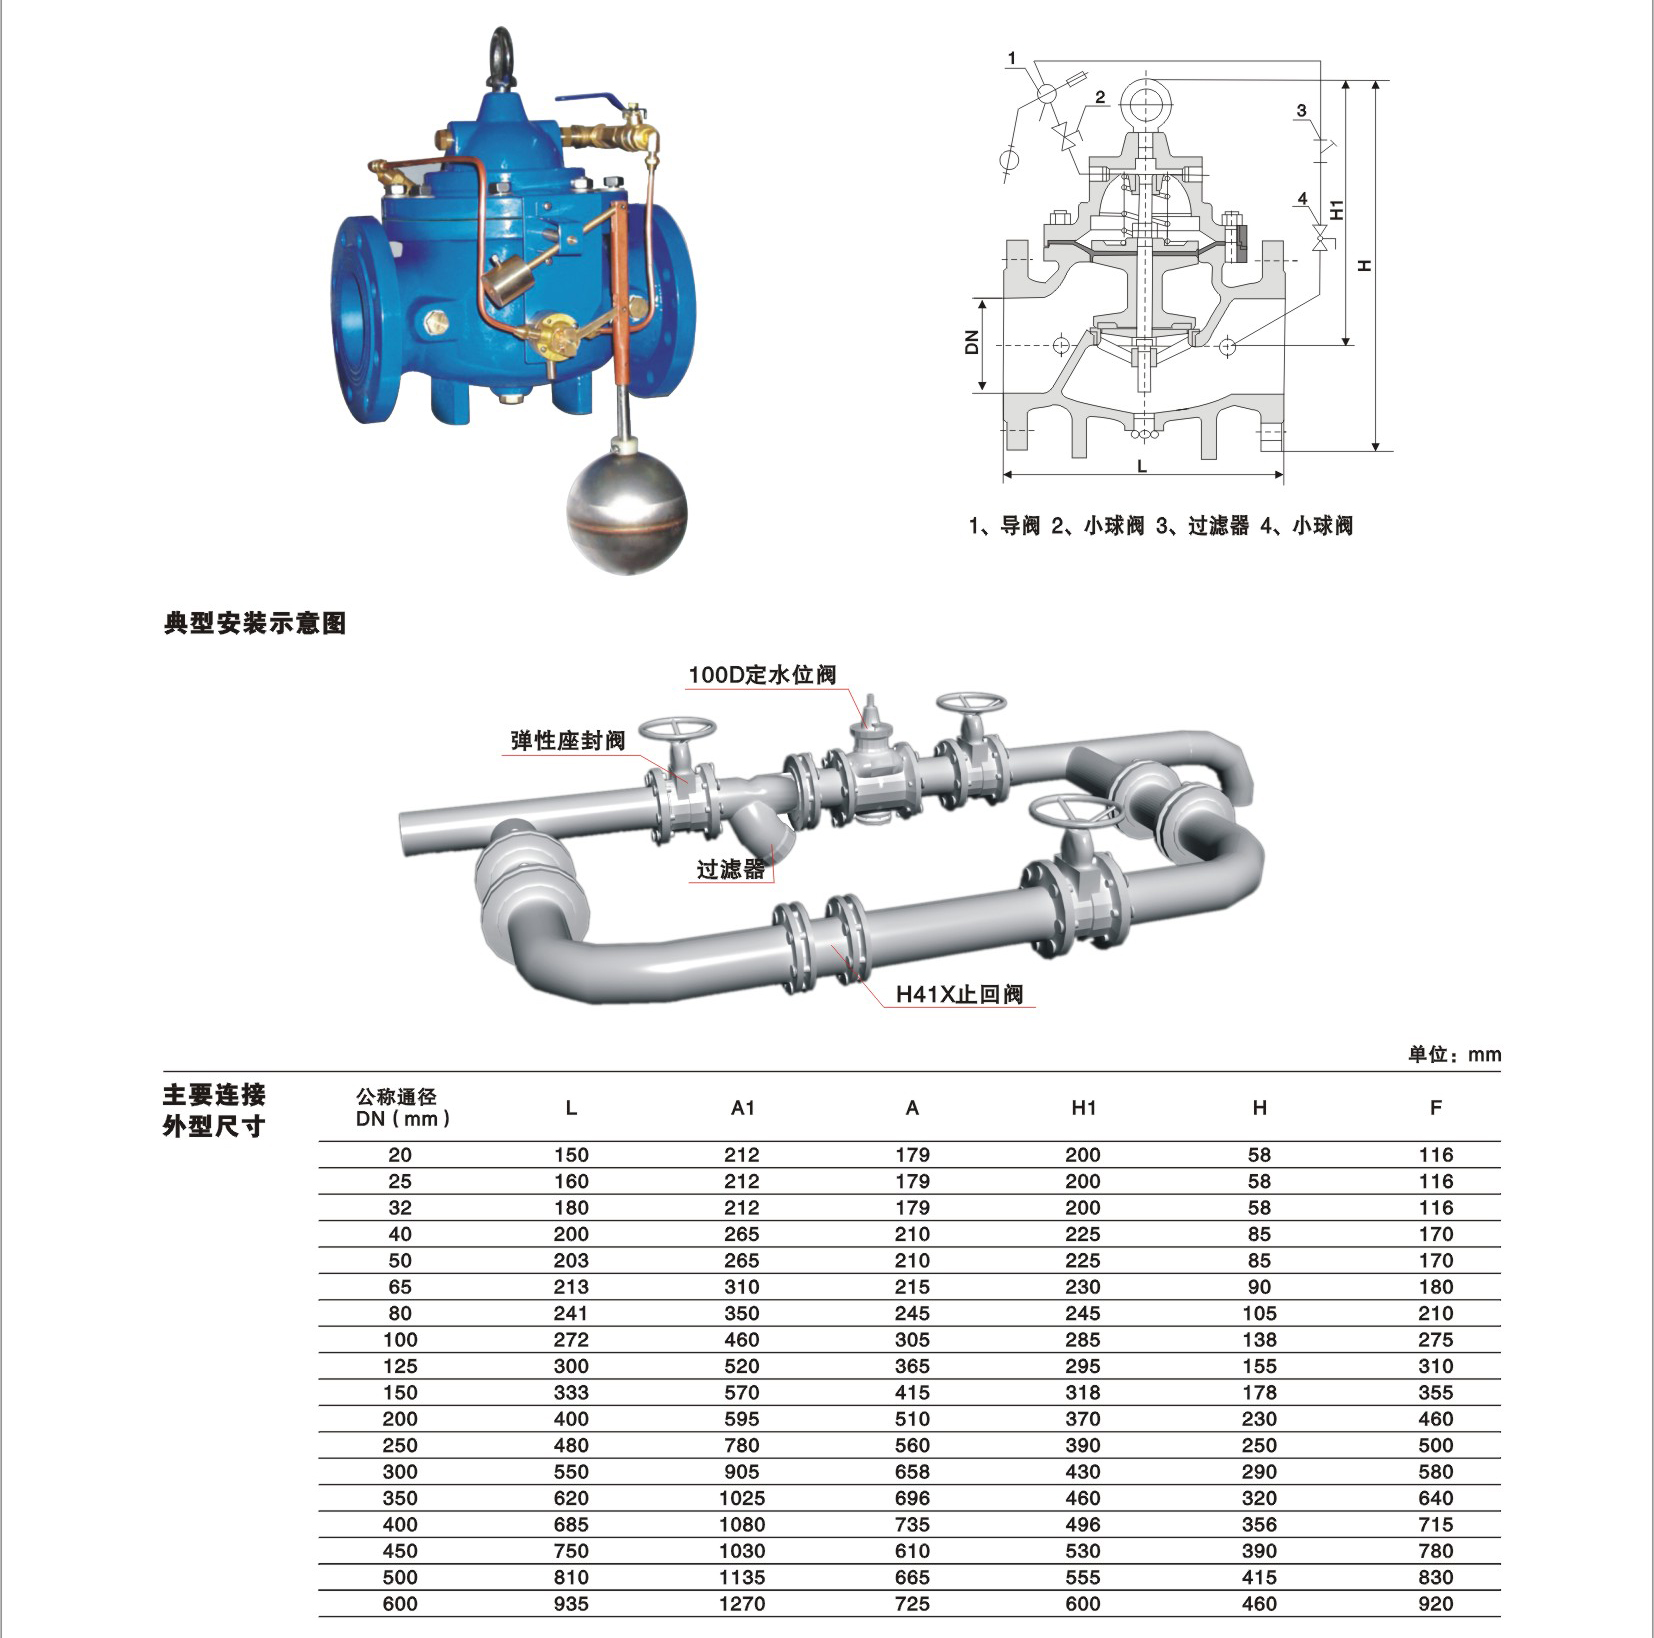 Electrically Operated Series Water Control Valve